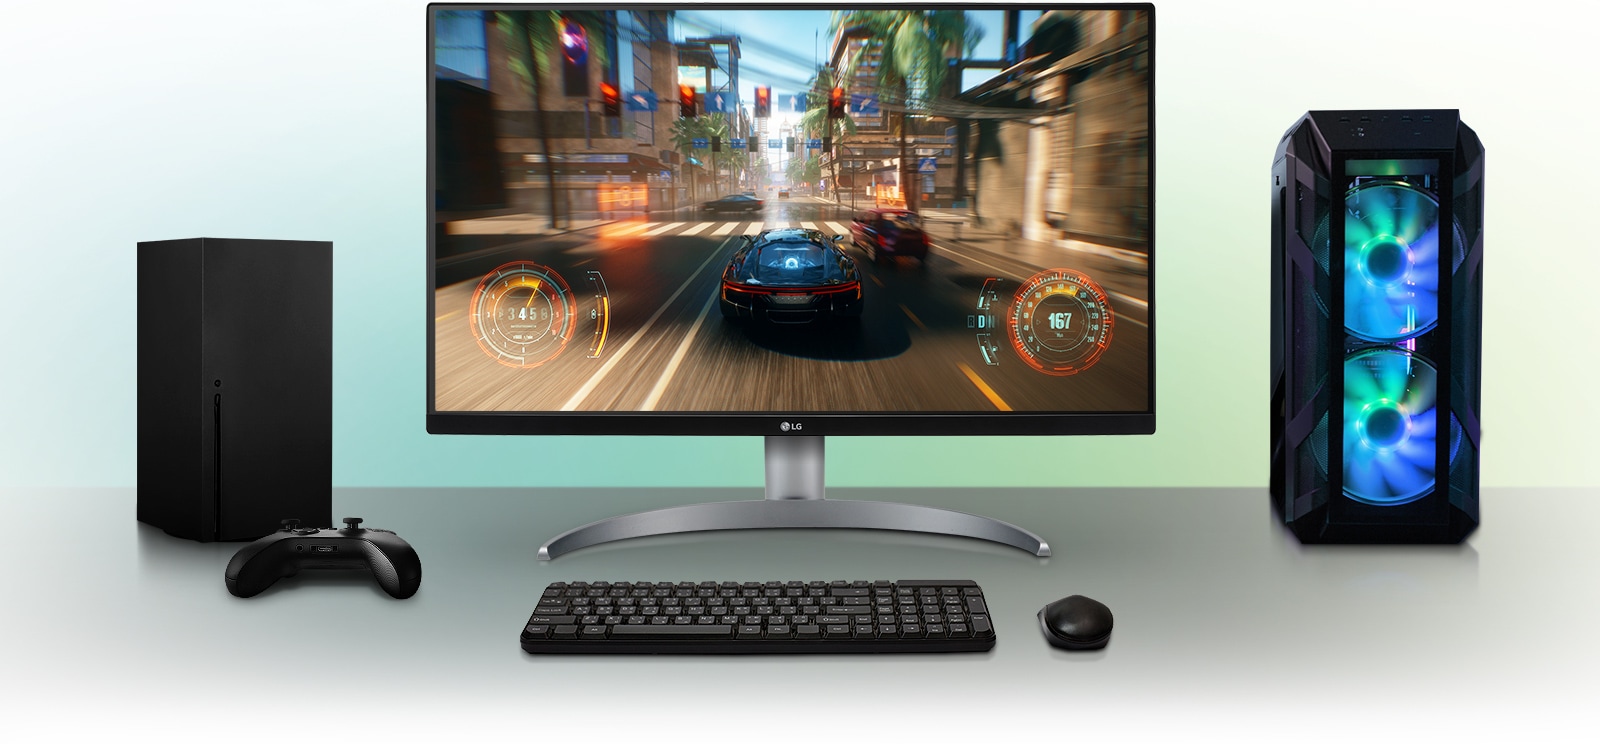 This monitor offer clear visuals and the accurate vibrancy of color.